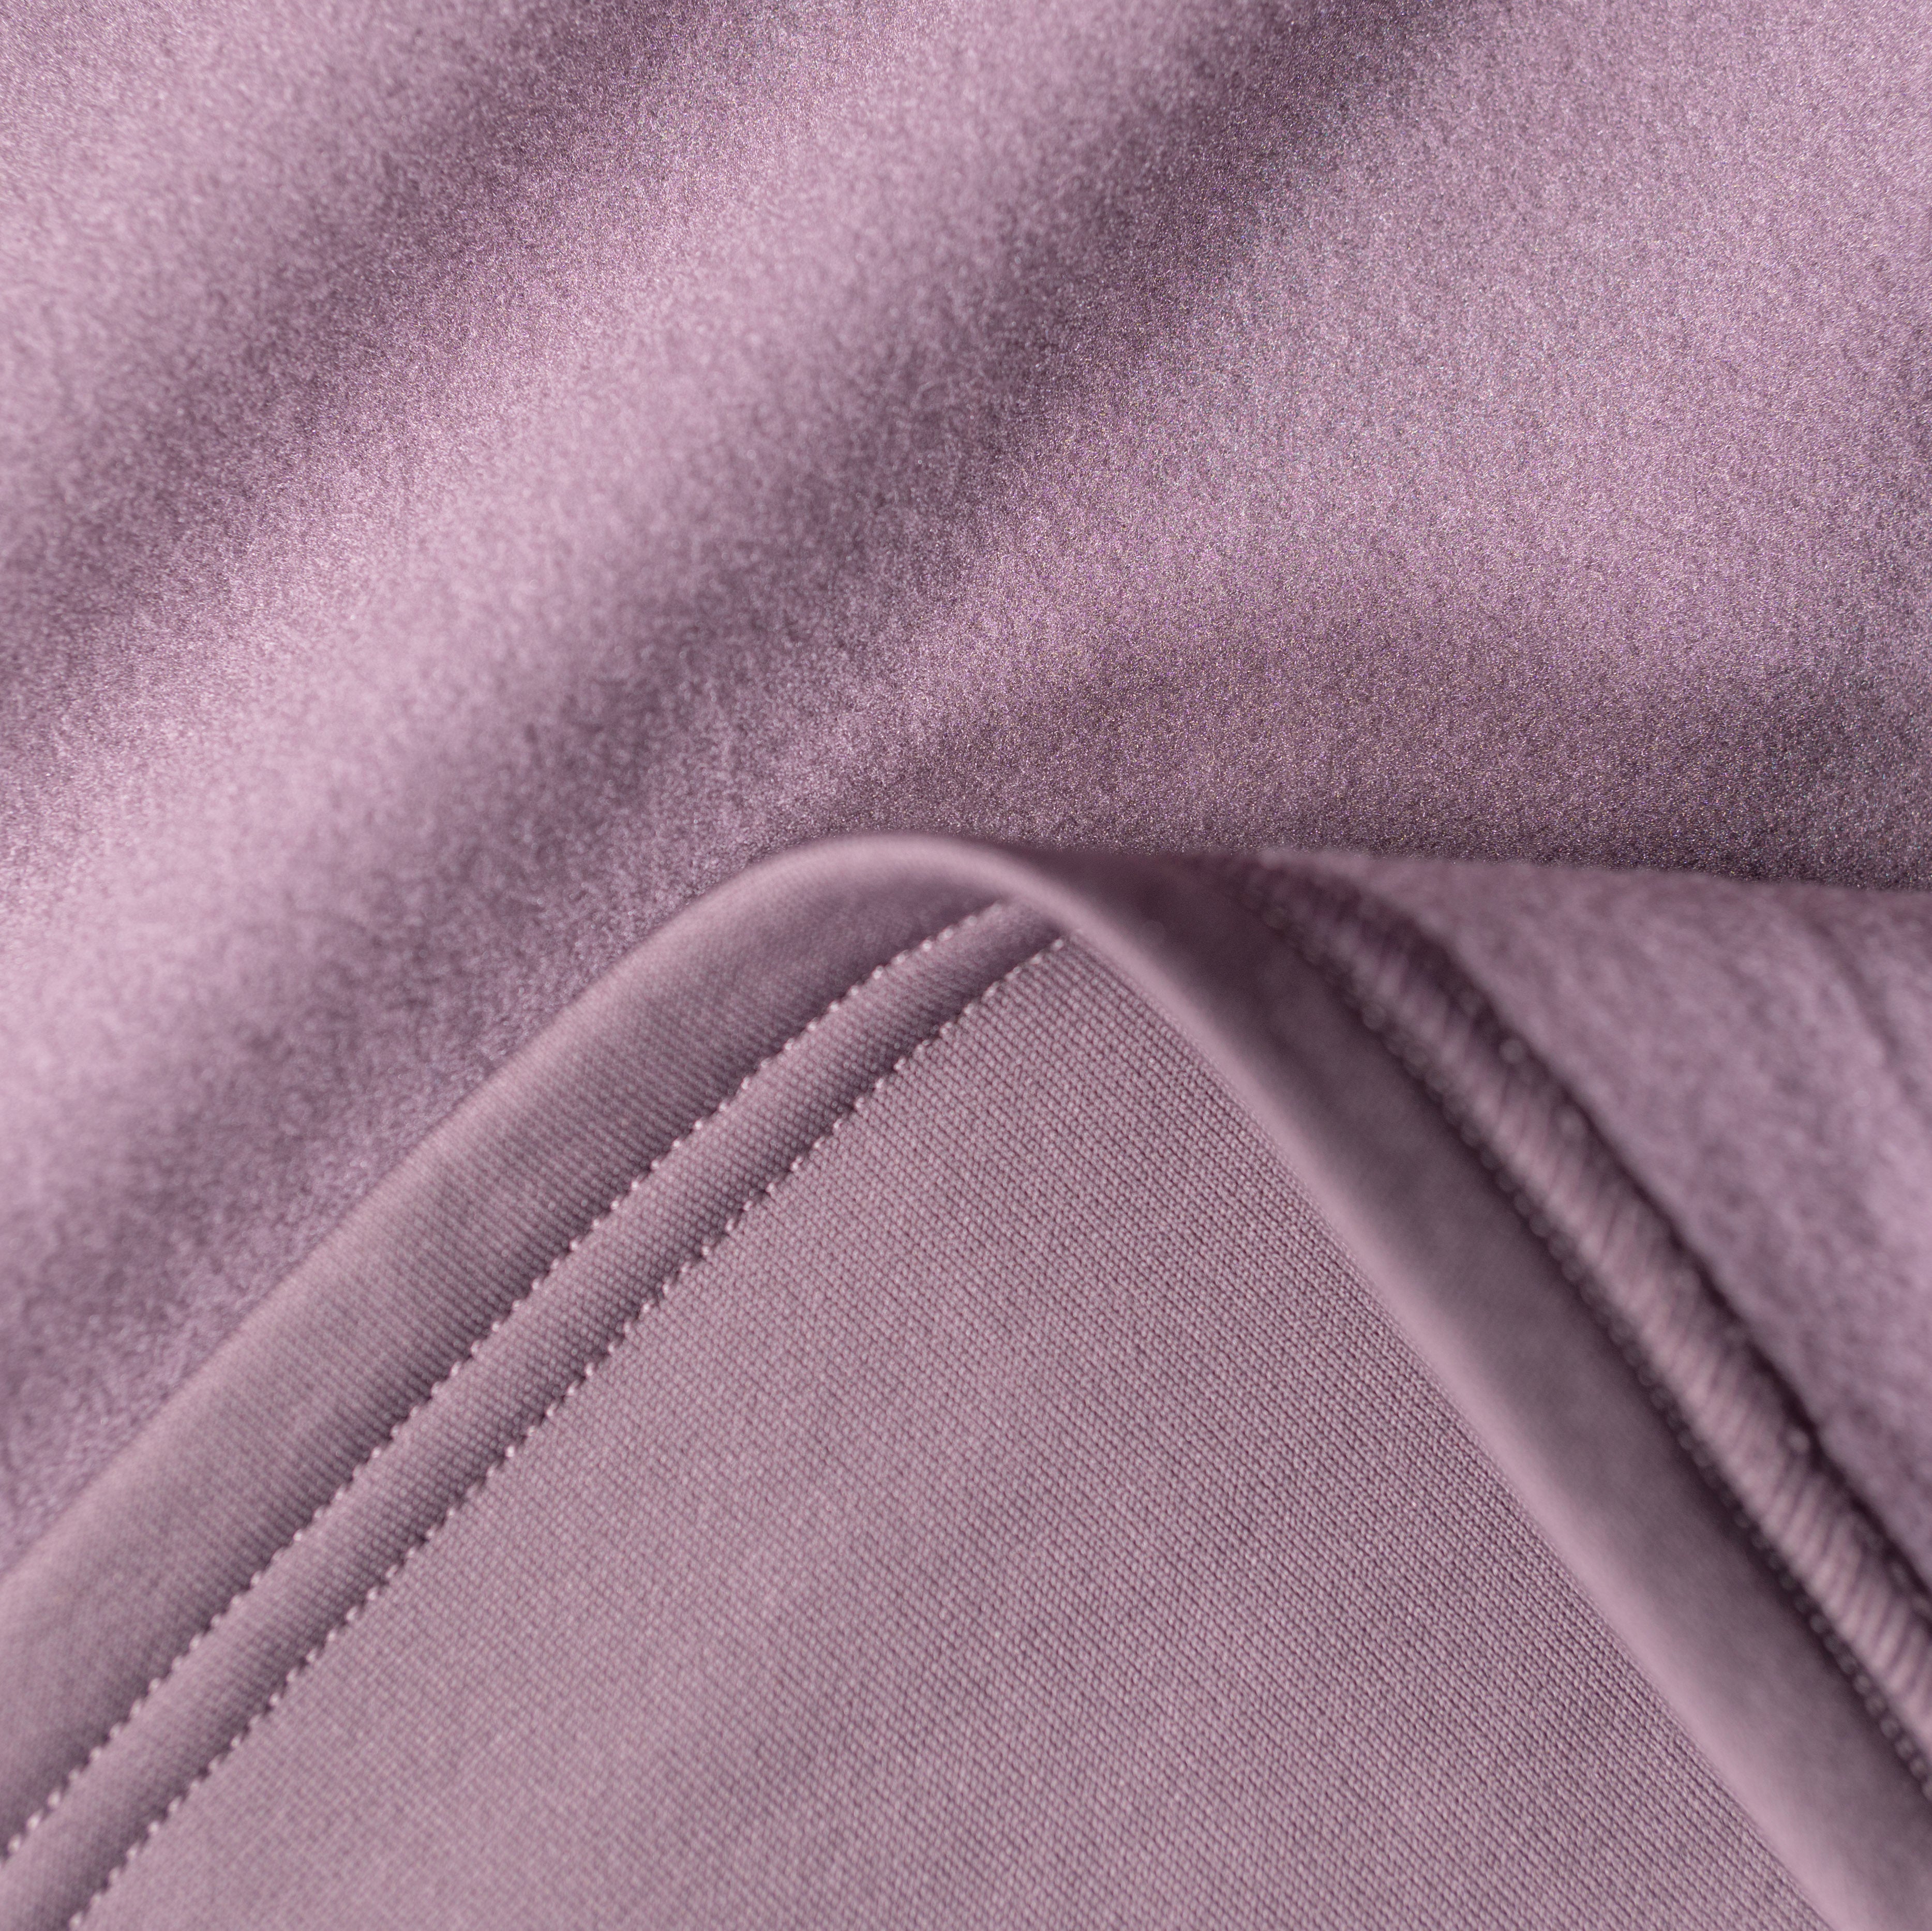 THERMO STRETCH fabric. Built for durable performance.